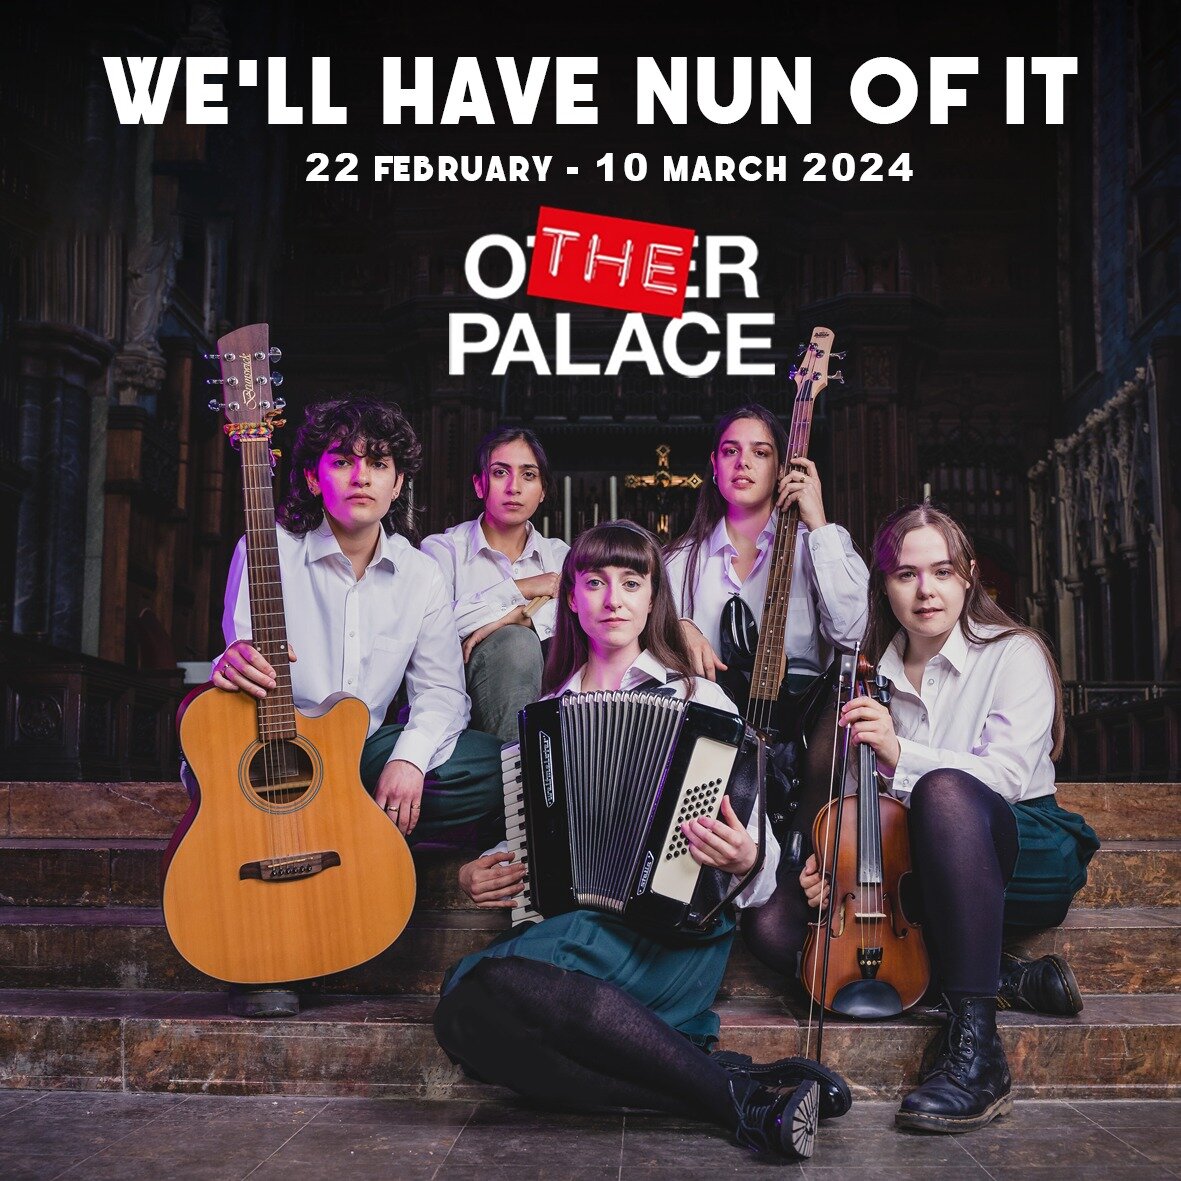 Sister Sister Productions @sisterprods proudly announces the electrifying premiere of 'We'll Have Nun' of It at London's prestigious @theotherpalace theatre on Thursday, 22 February 2024, after a resounding triumph with ★★★★★ (Broadway World) sold-ou